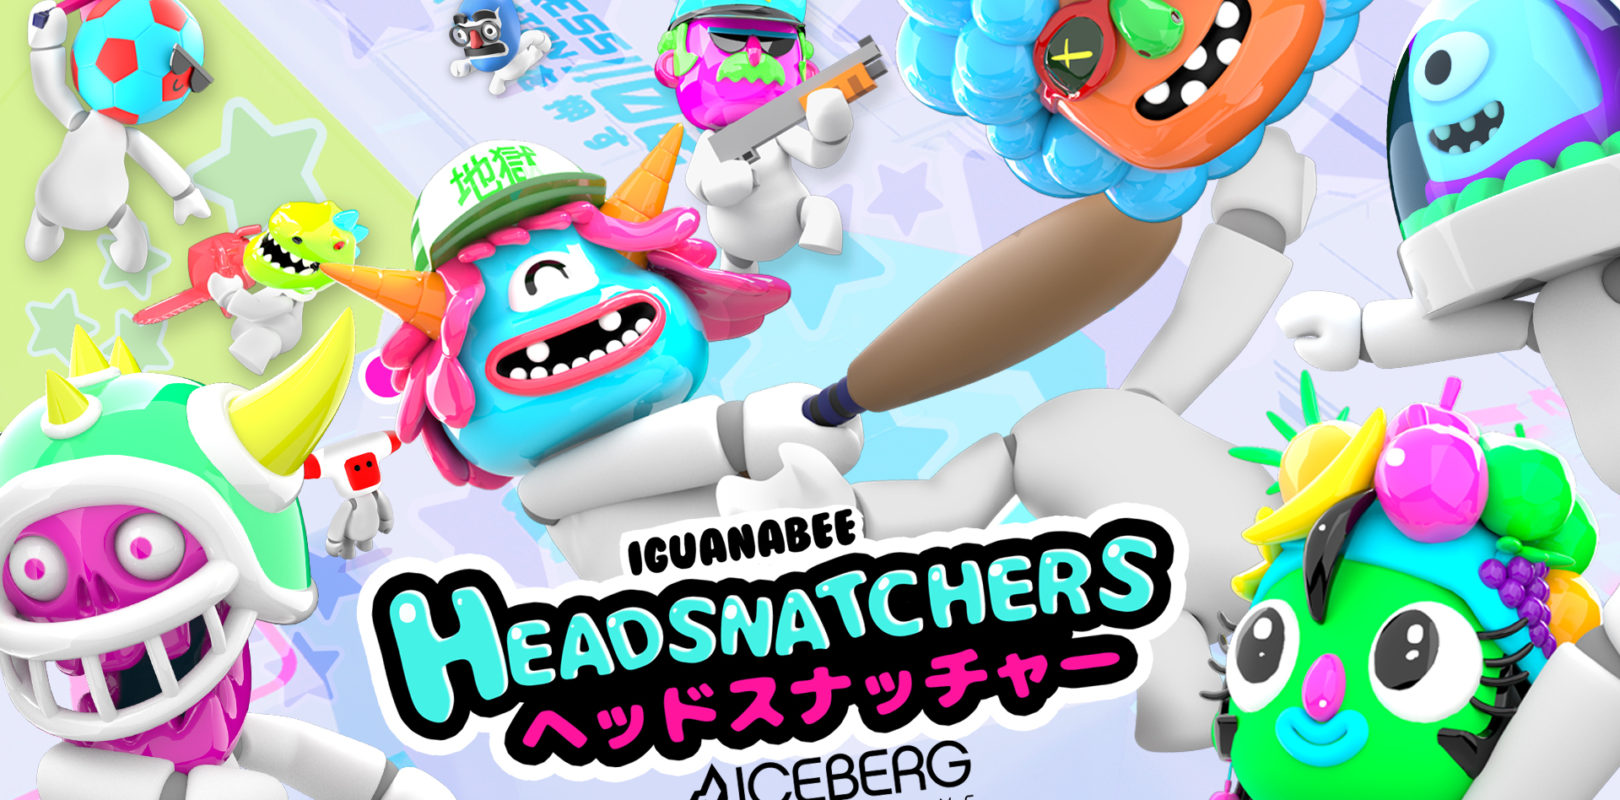 headsnatchers game modes